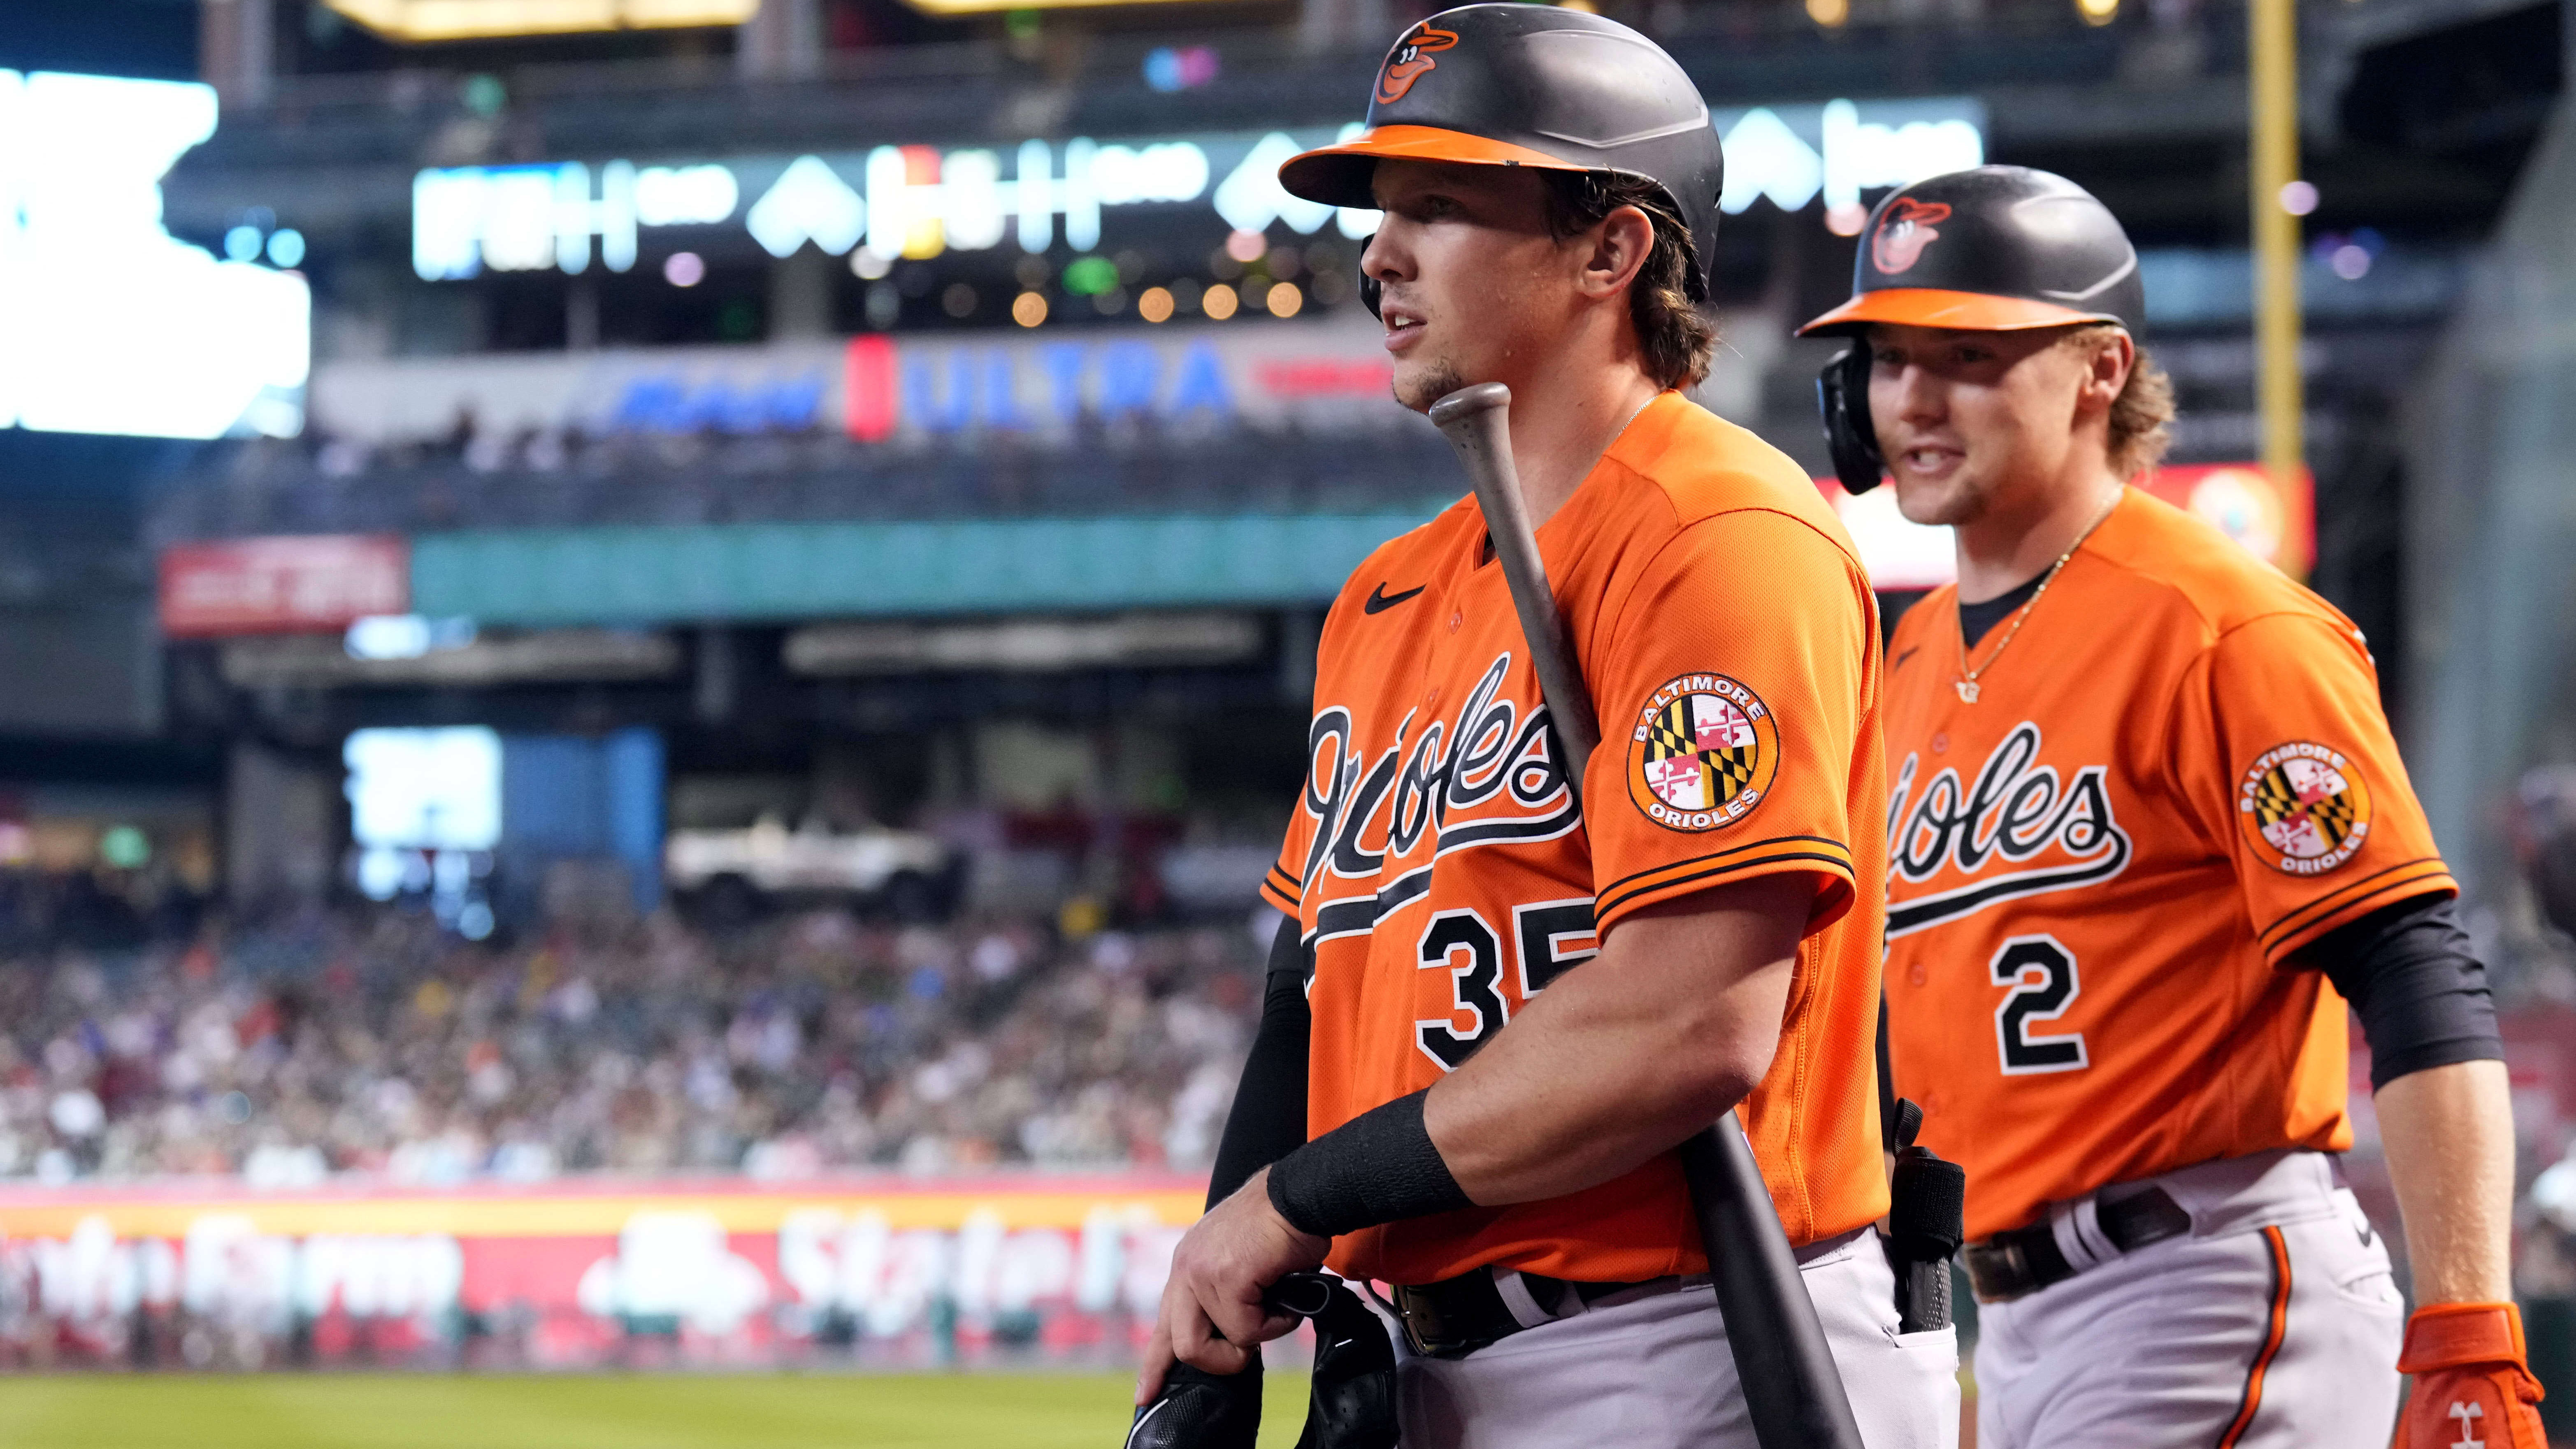 Orioles keep an eye on playoffs during series vs. Red Sox, Sports